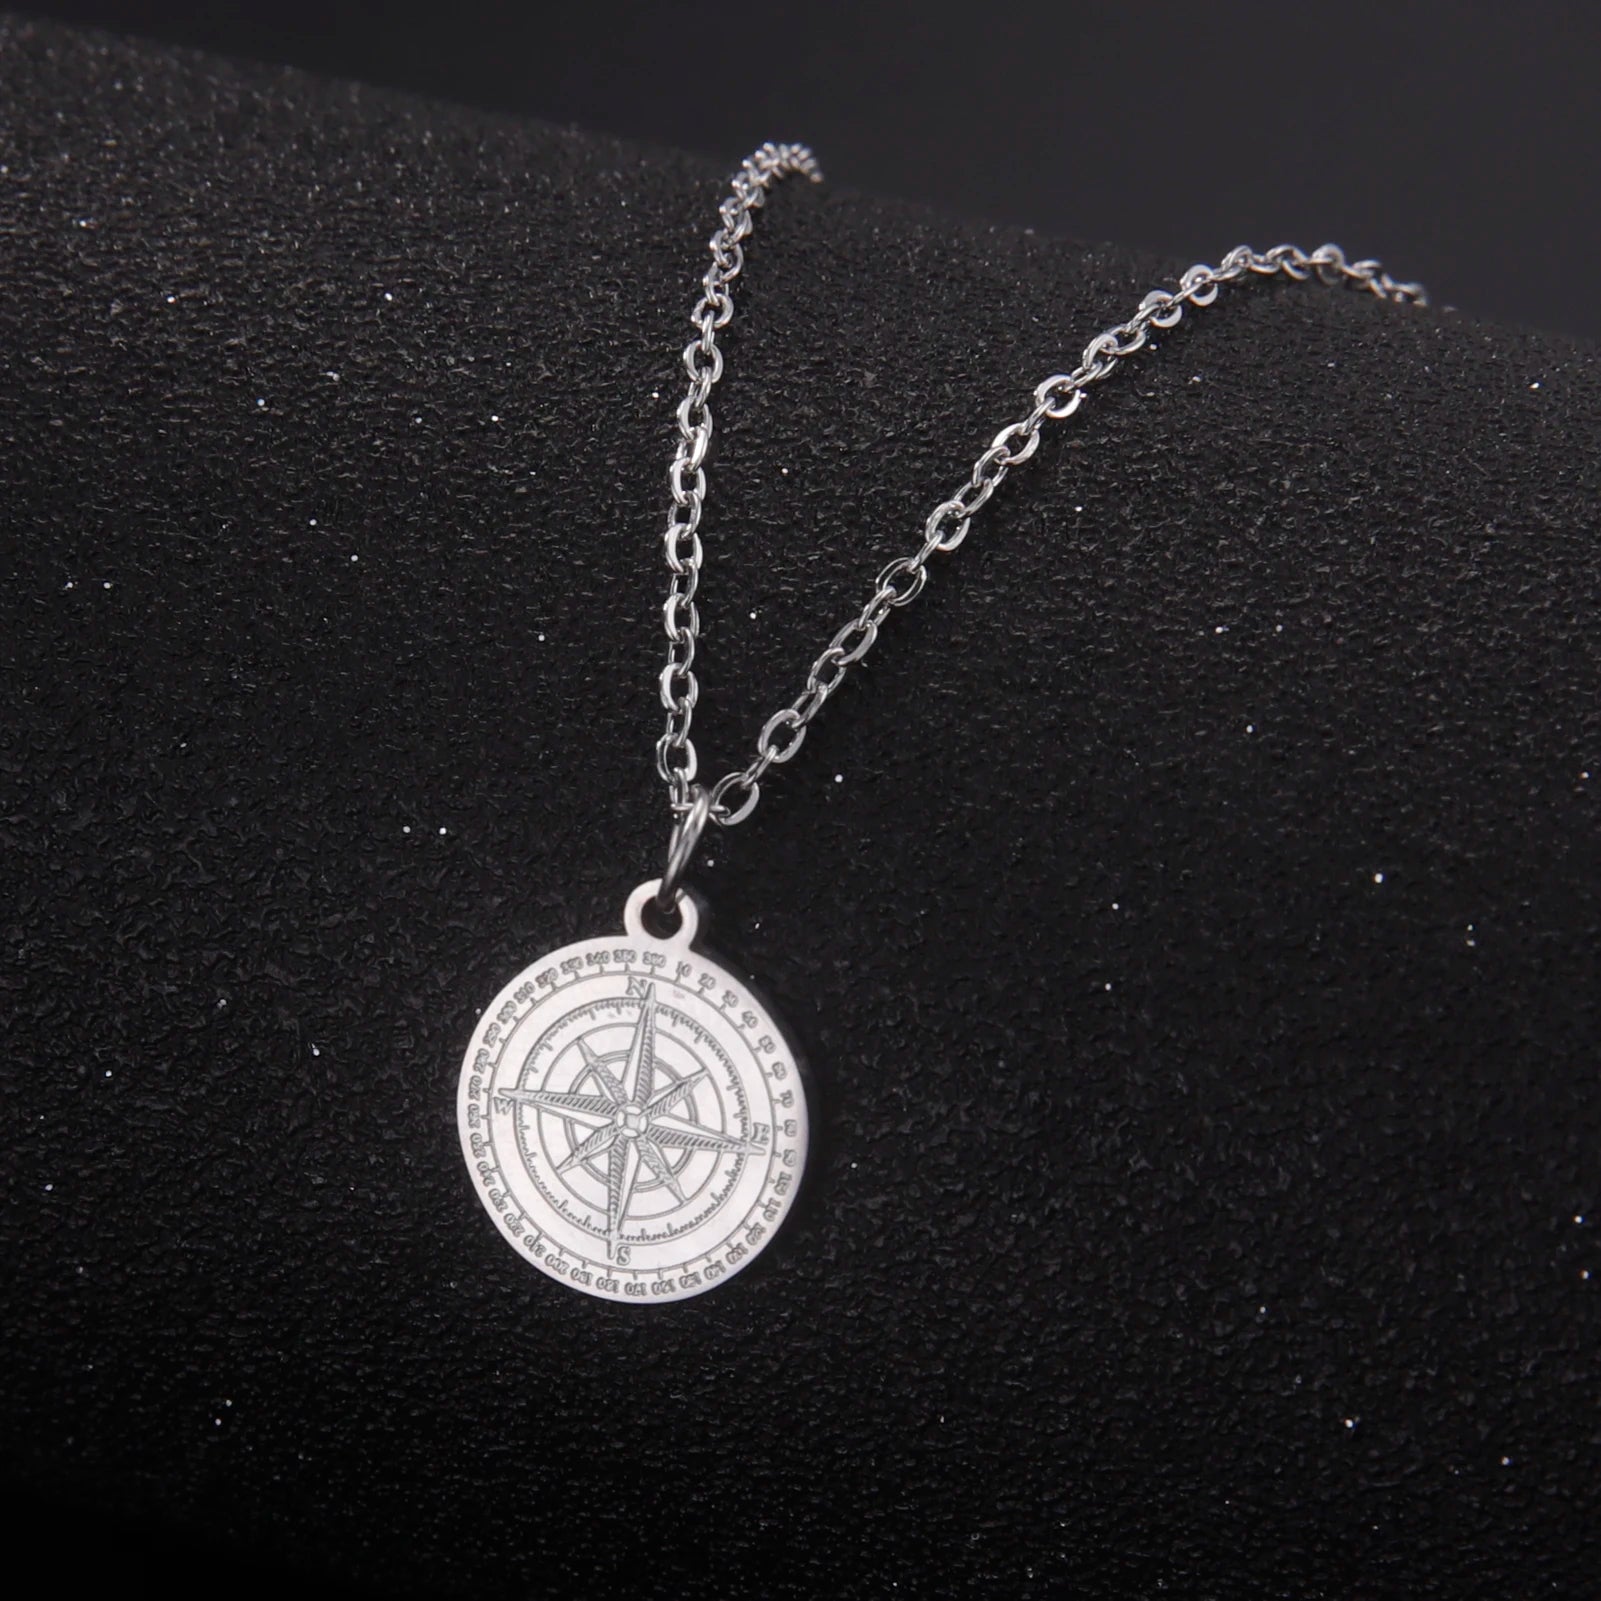 Stainless Steel Compass Pendant Necklace - Madeinsea©